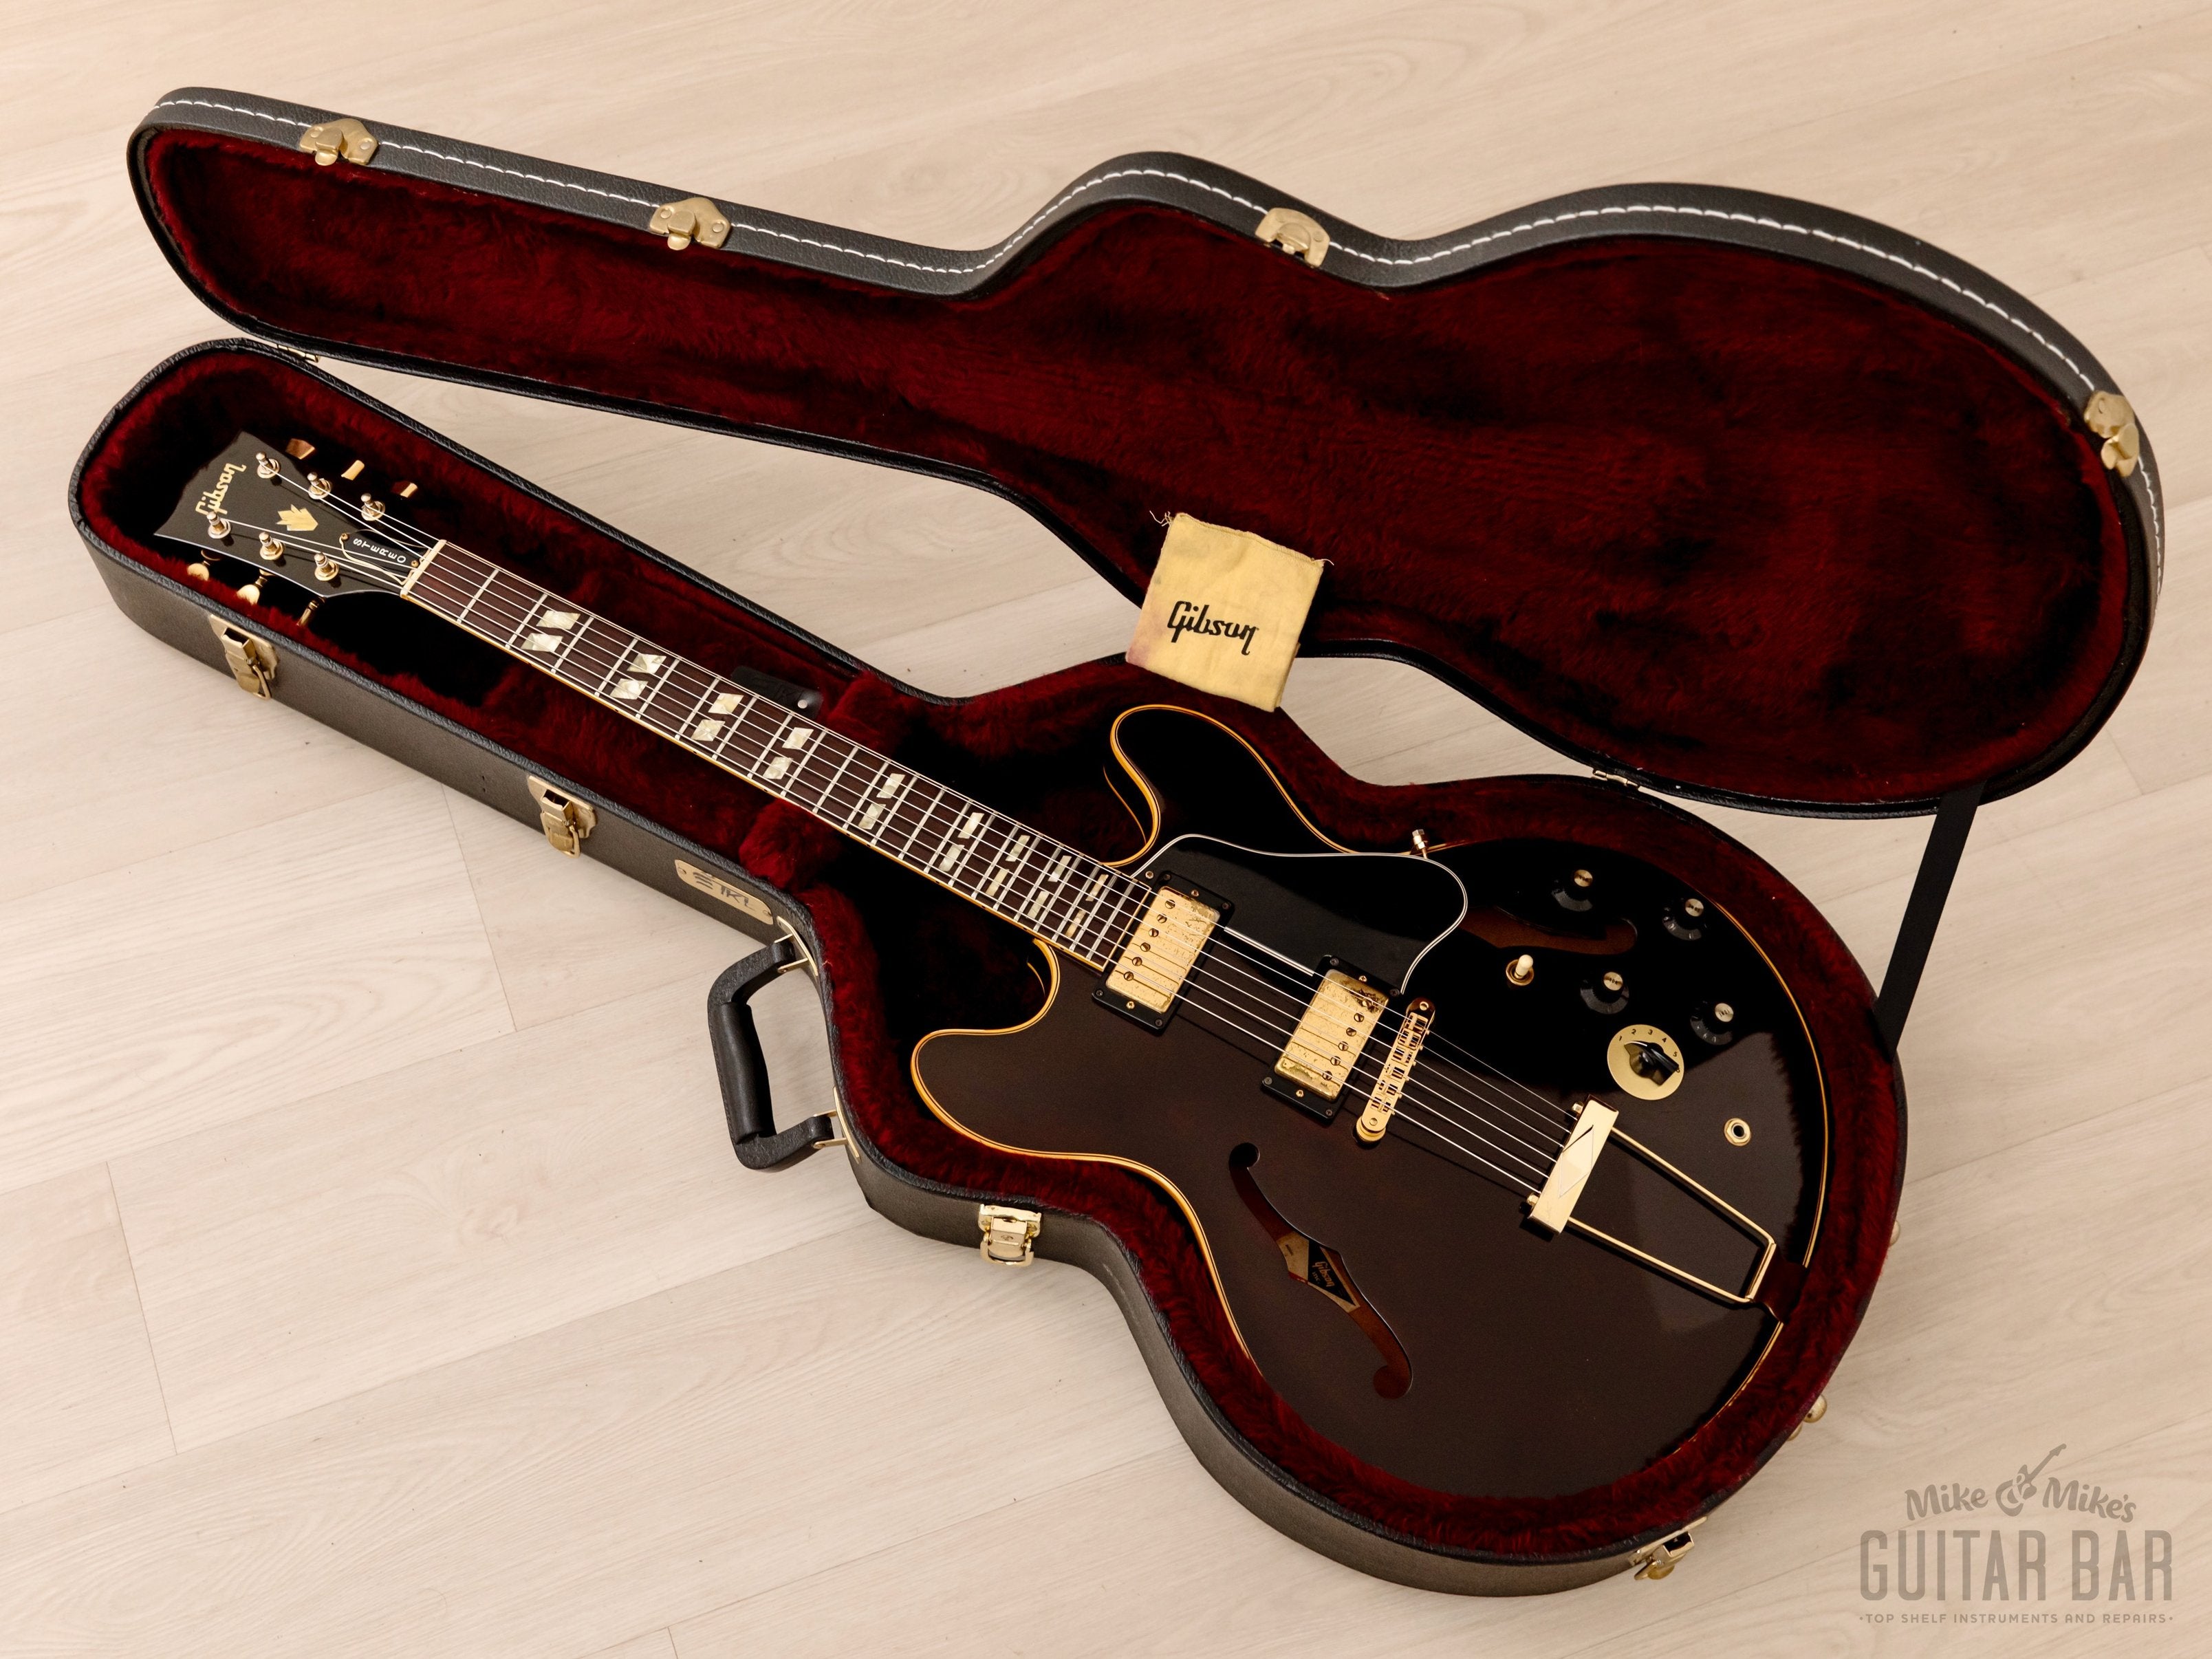 1979 Gibson ES-345 TD Vintage Semi-Hollow Guitar Wine Red w/ T Tops & Case, 1 11/16